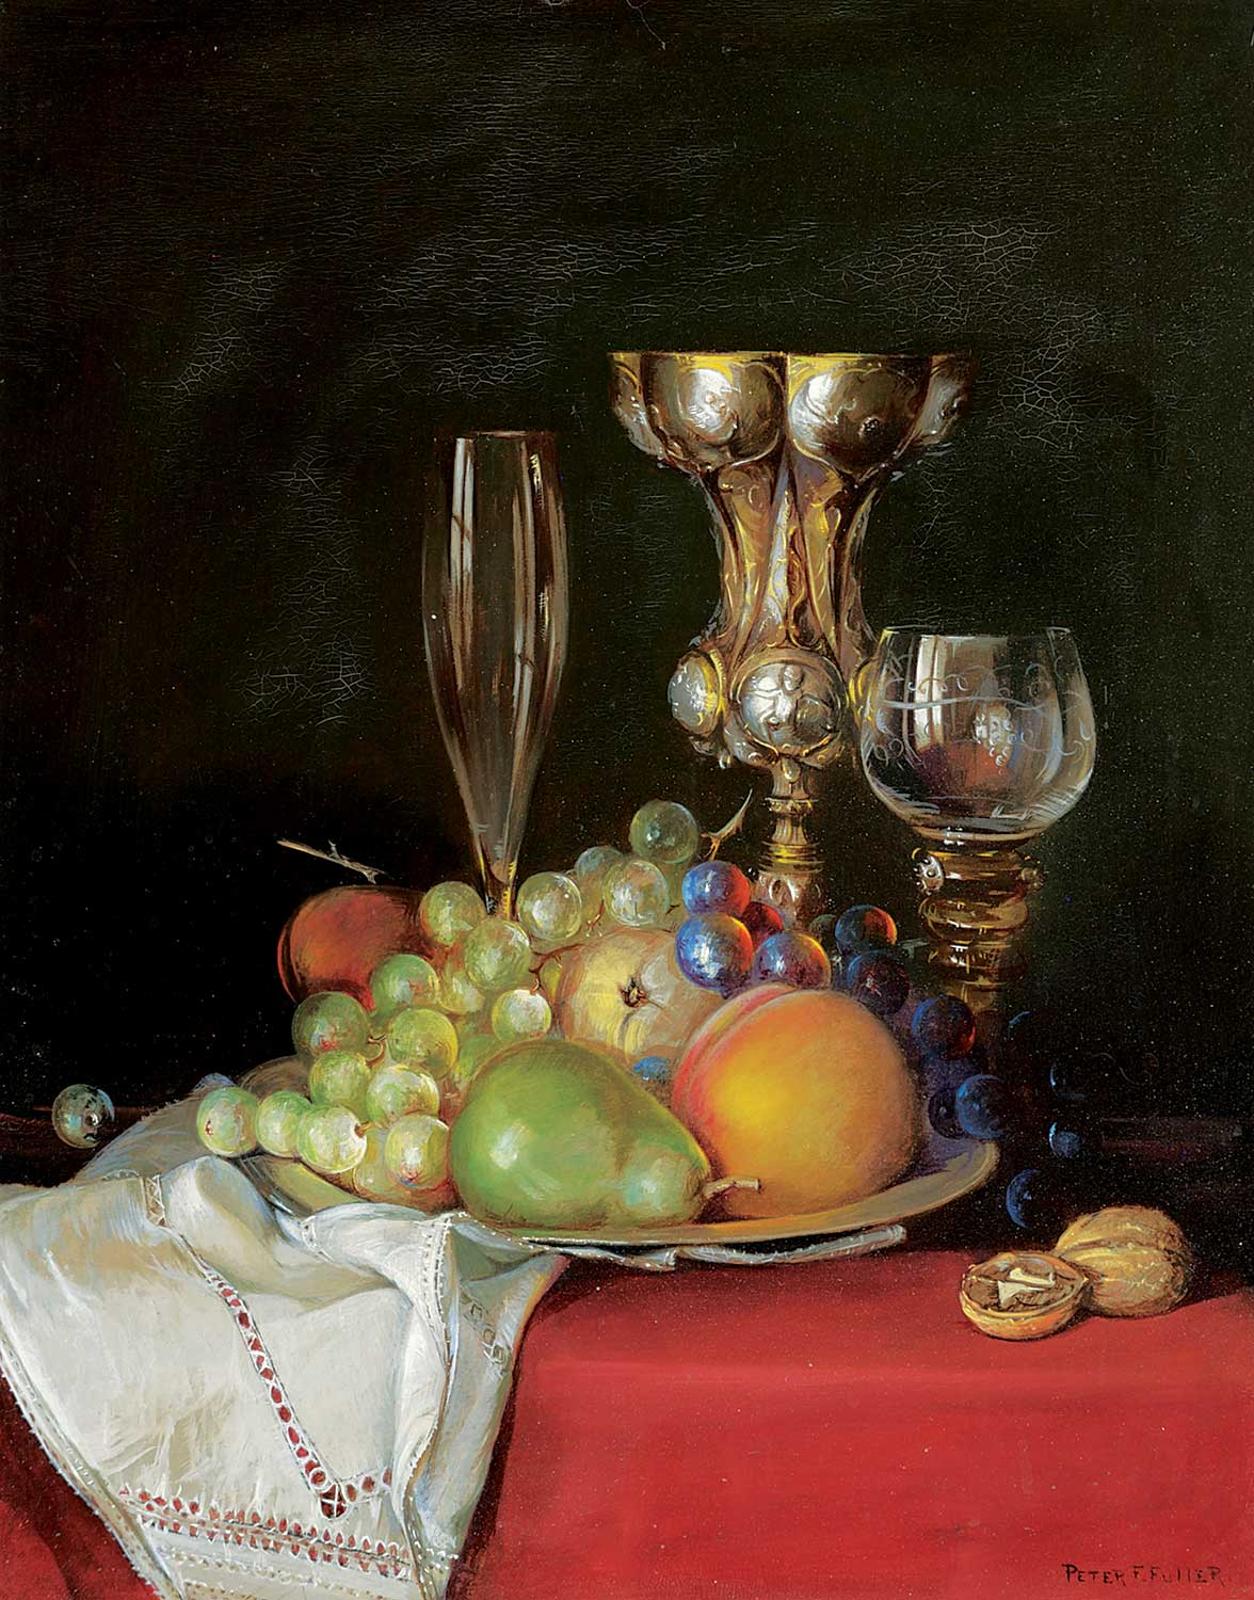 Peter F. Fuller - Untitled - The Antique Tablesetting